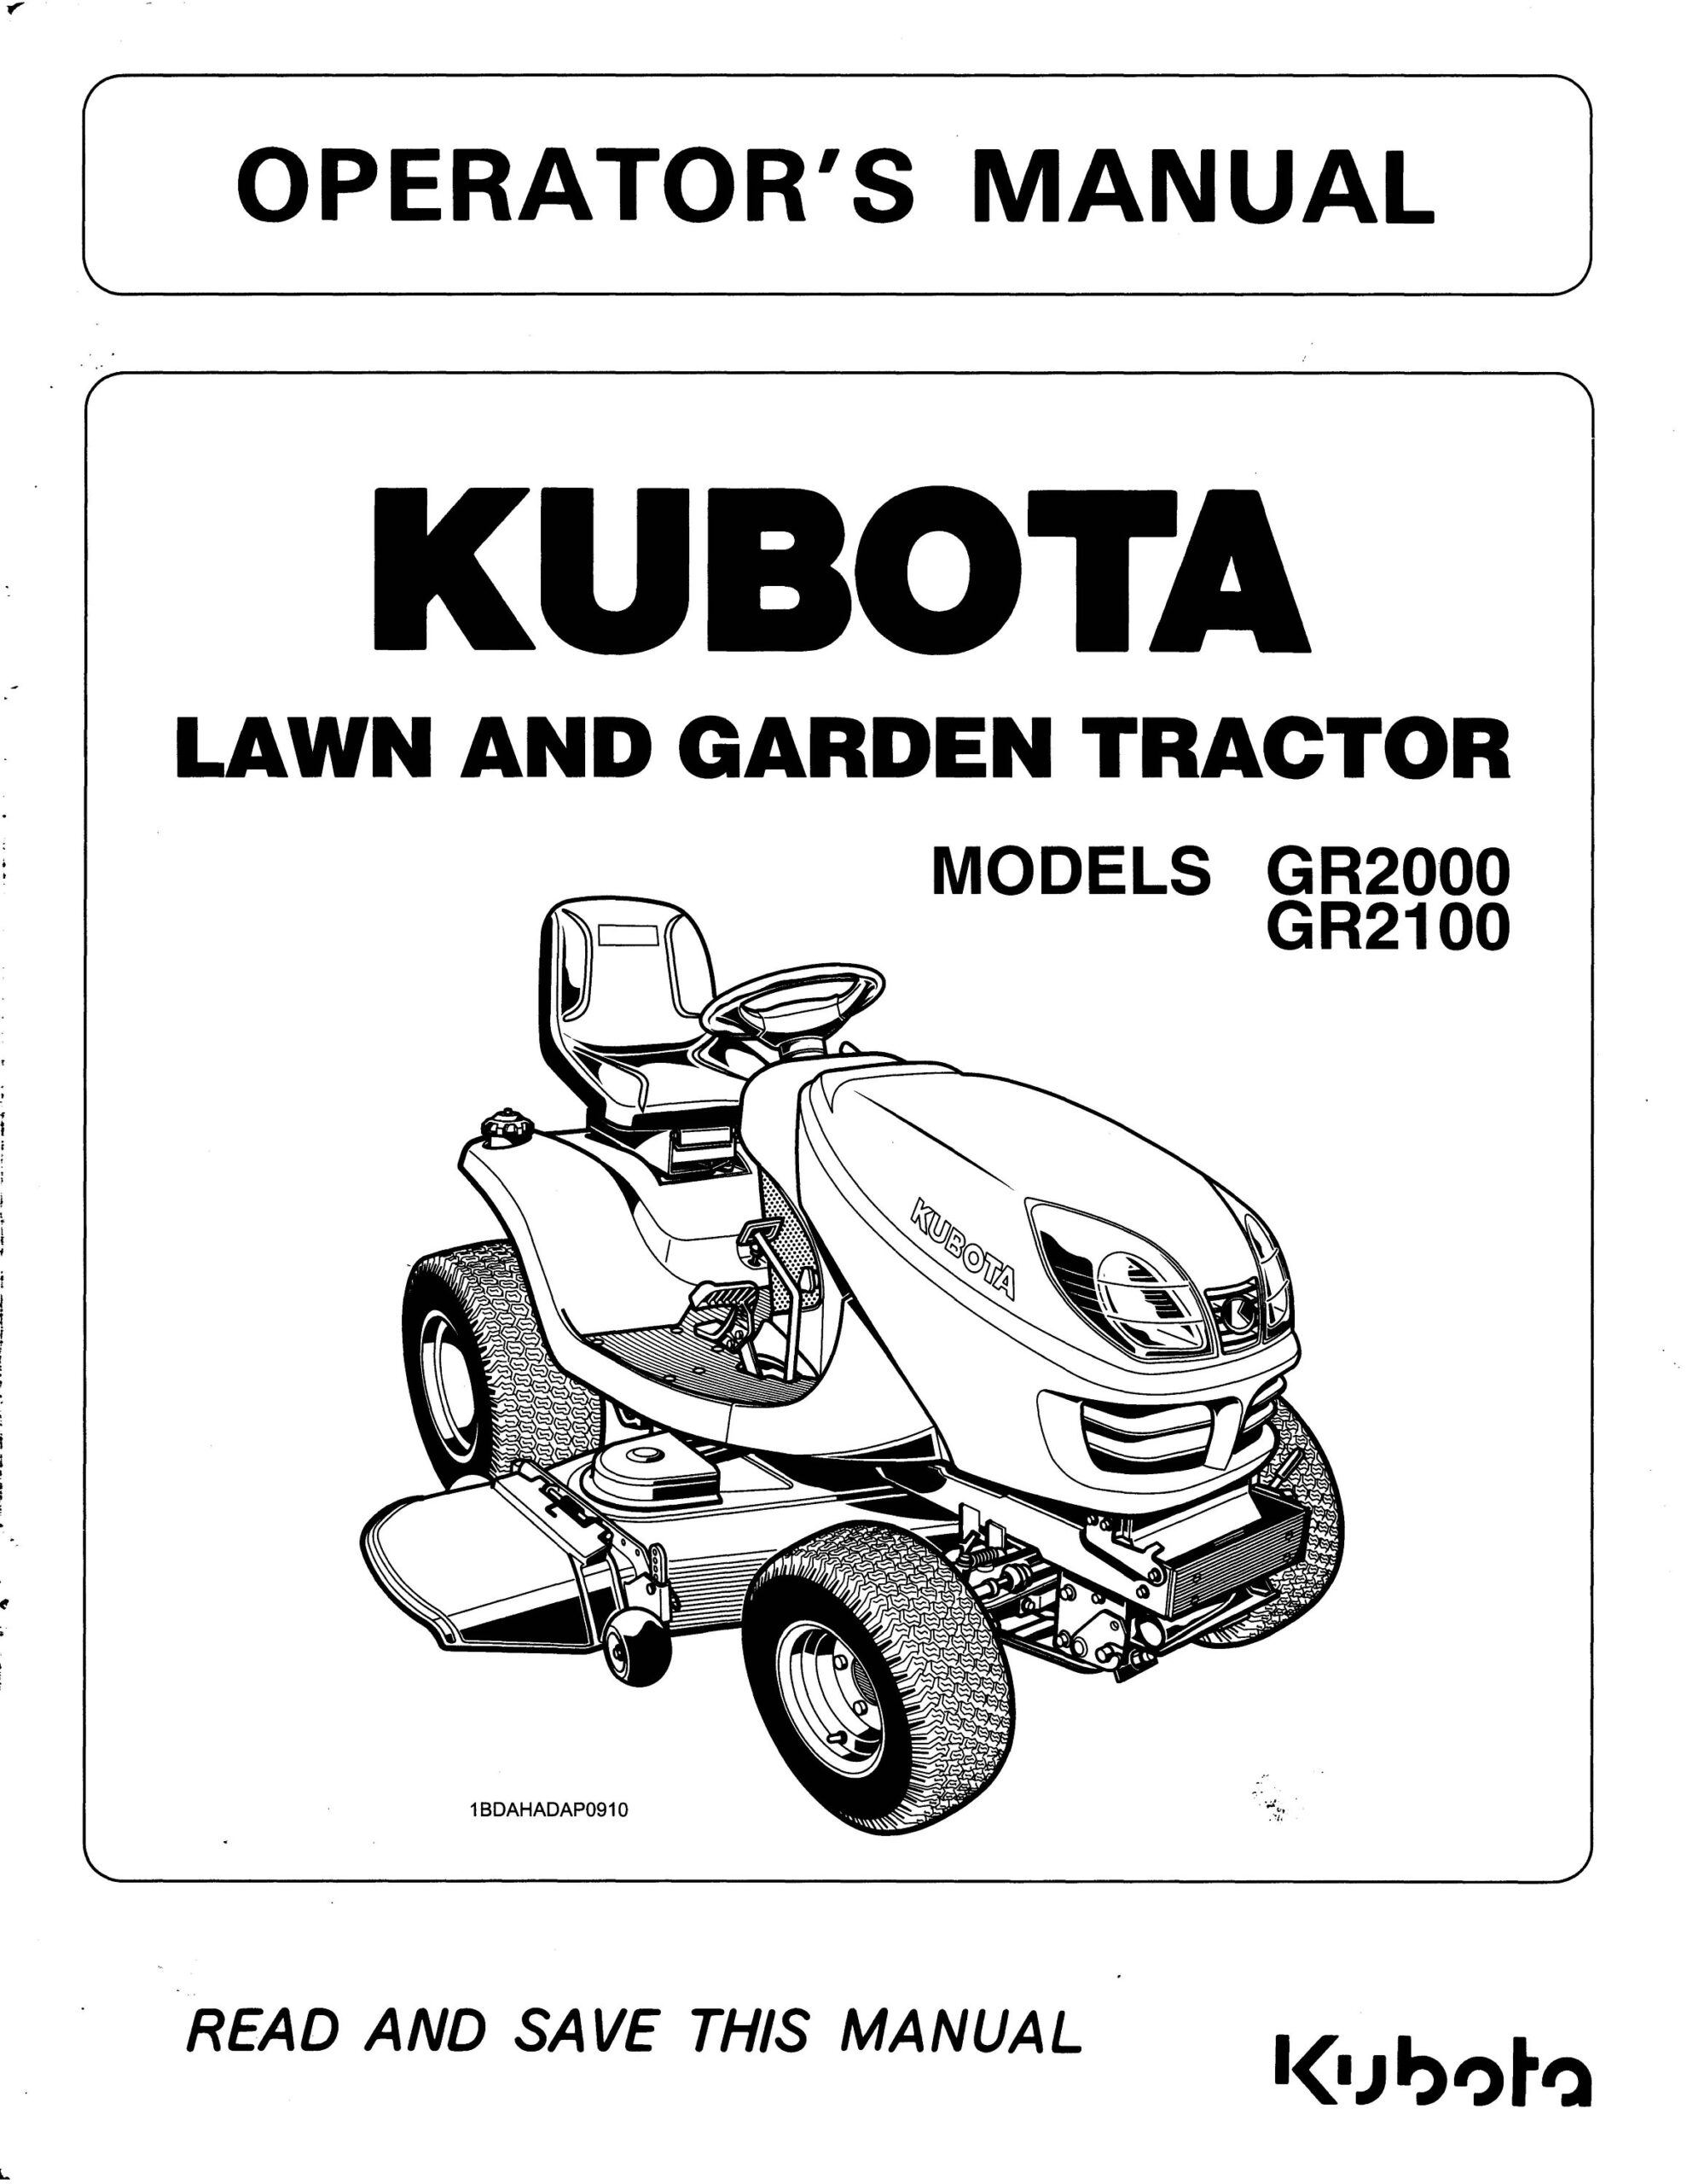 Ultimate Guide to the Kubota TG1860 Diesel Tractor